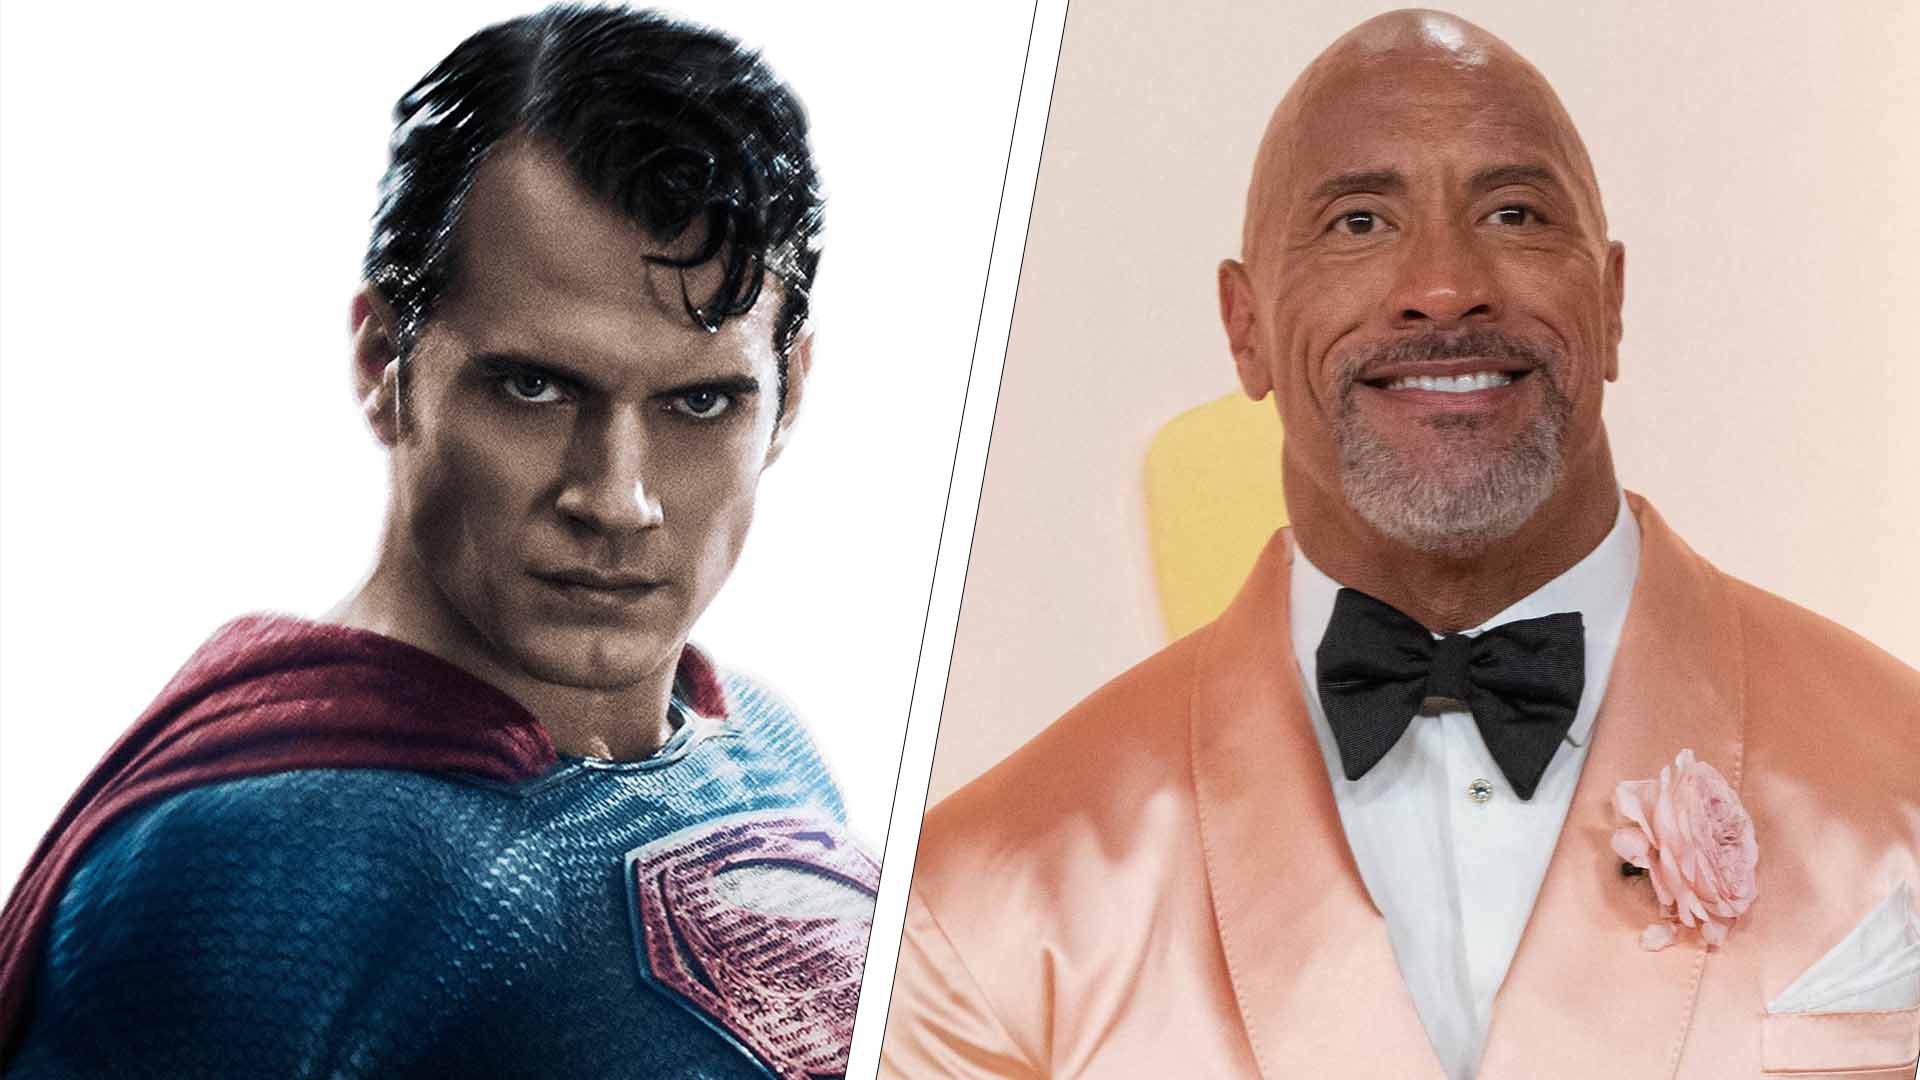 Henry Cavill Is Greatest Superman Actor Ever, Says Dwayne Johnson